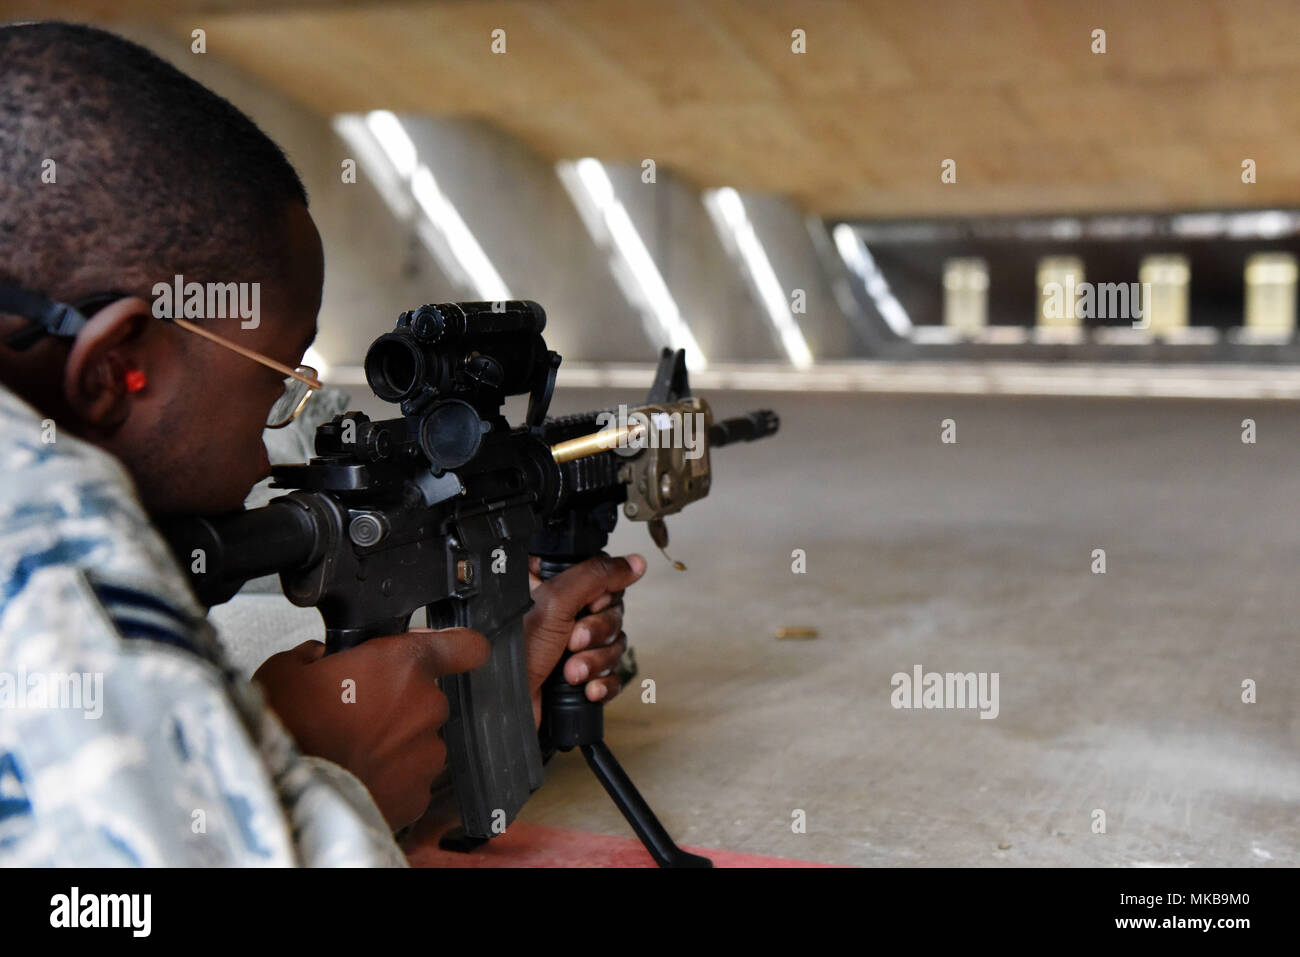 U.S. Air Force Airman 1st Class Naigo Chambers, 39th Security Forces  Squadron member, fires an M4 carbine rifle during the Combat Arms training  and Maintenance Qualifications course Nov. 16, 2017, at Incirlik